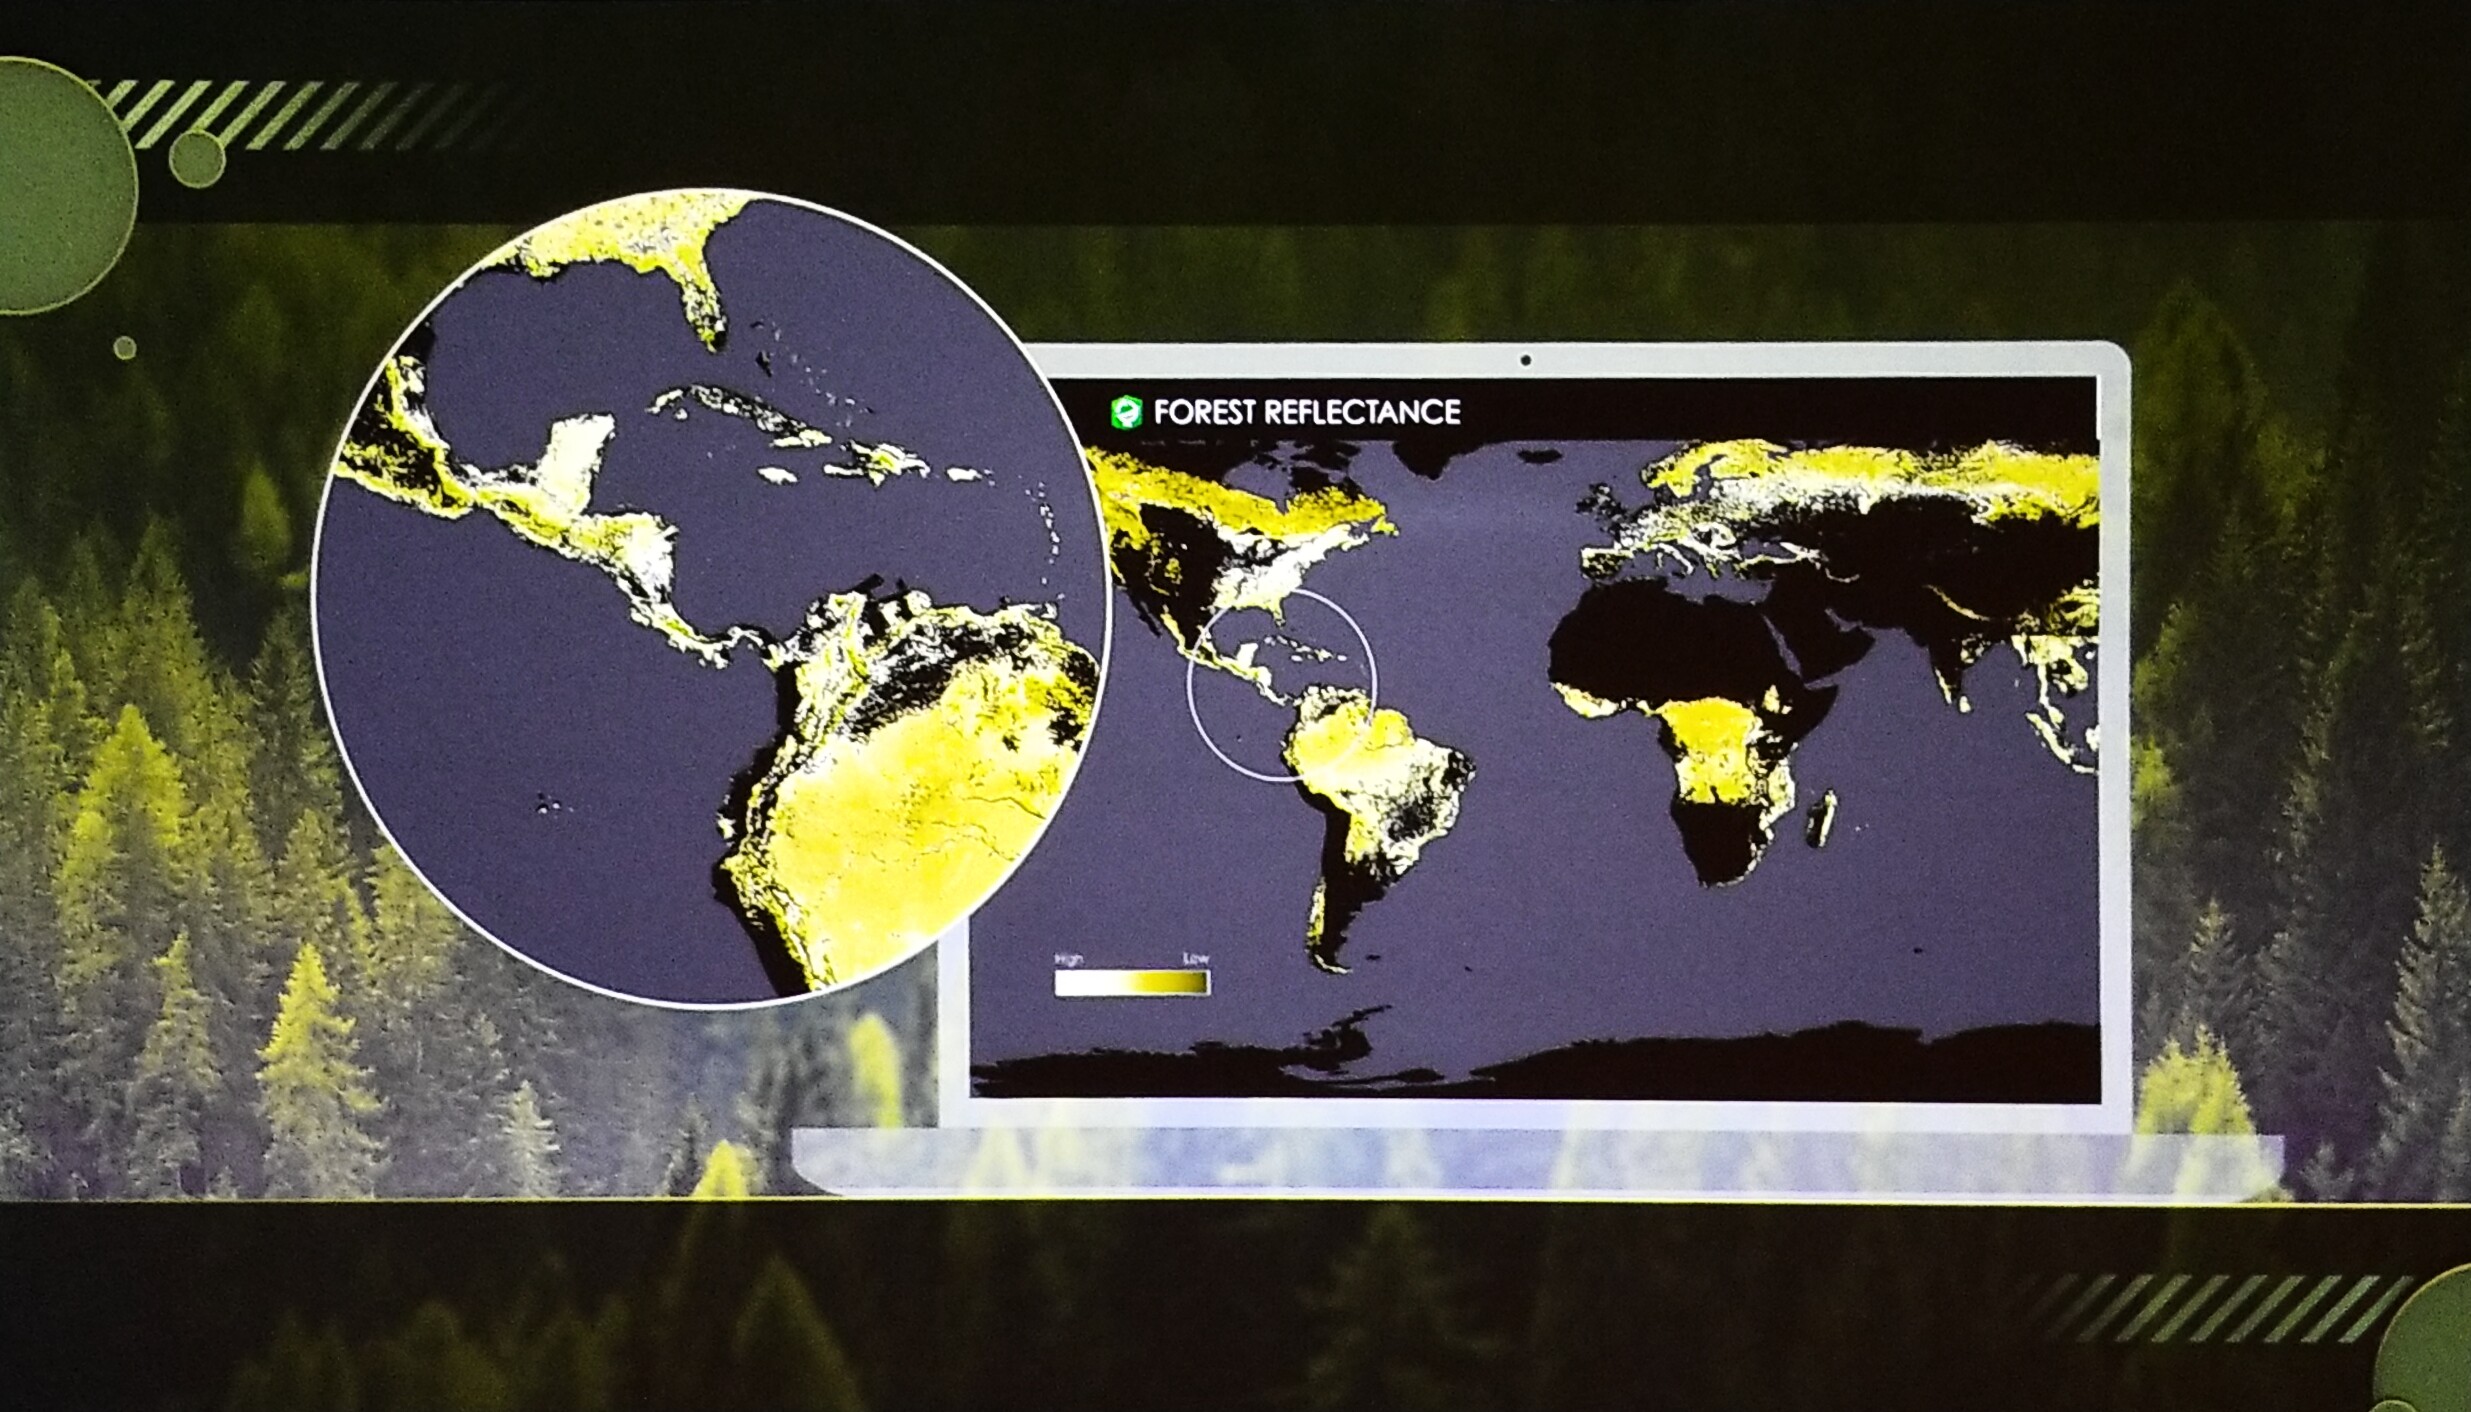 Forest Reflectance of Trees on the Globe